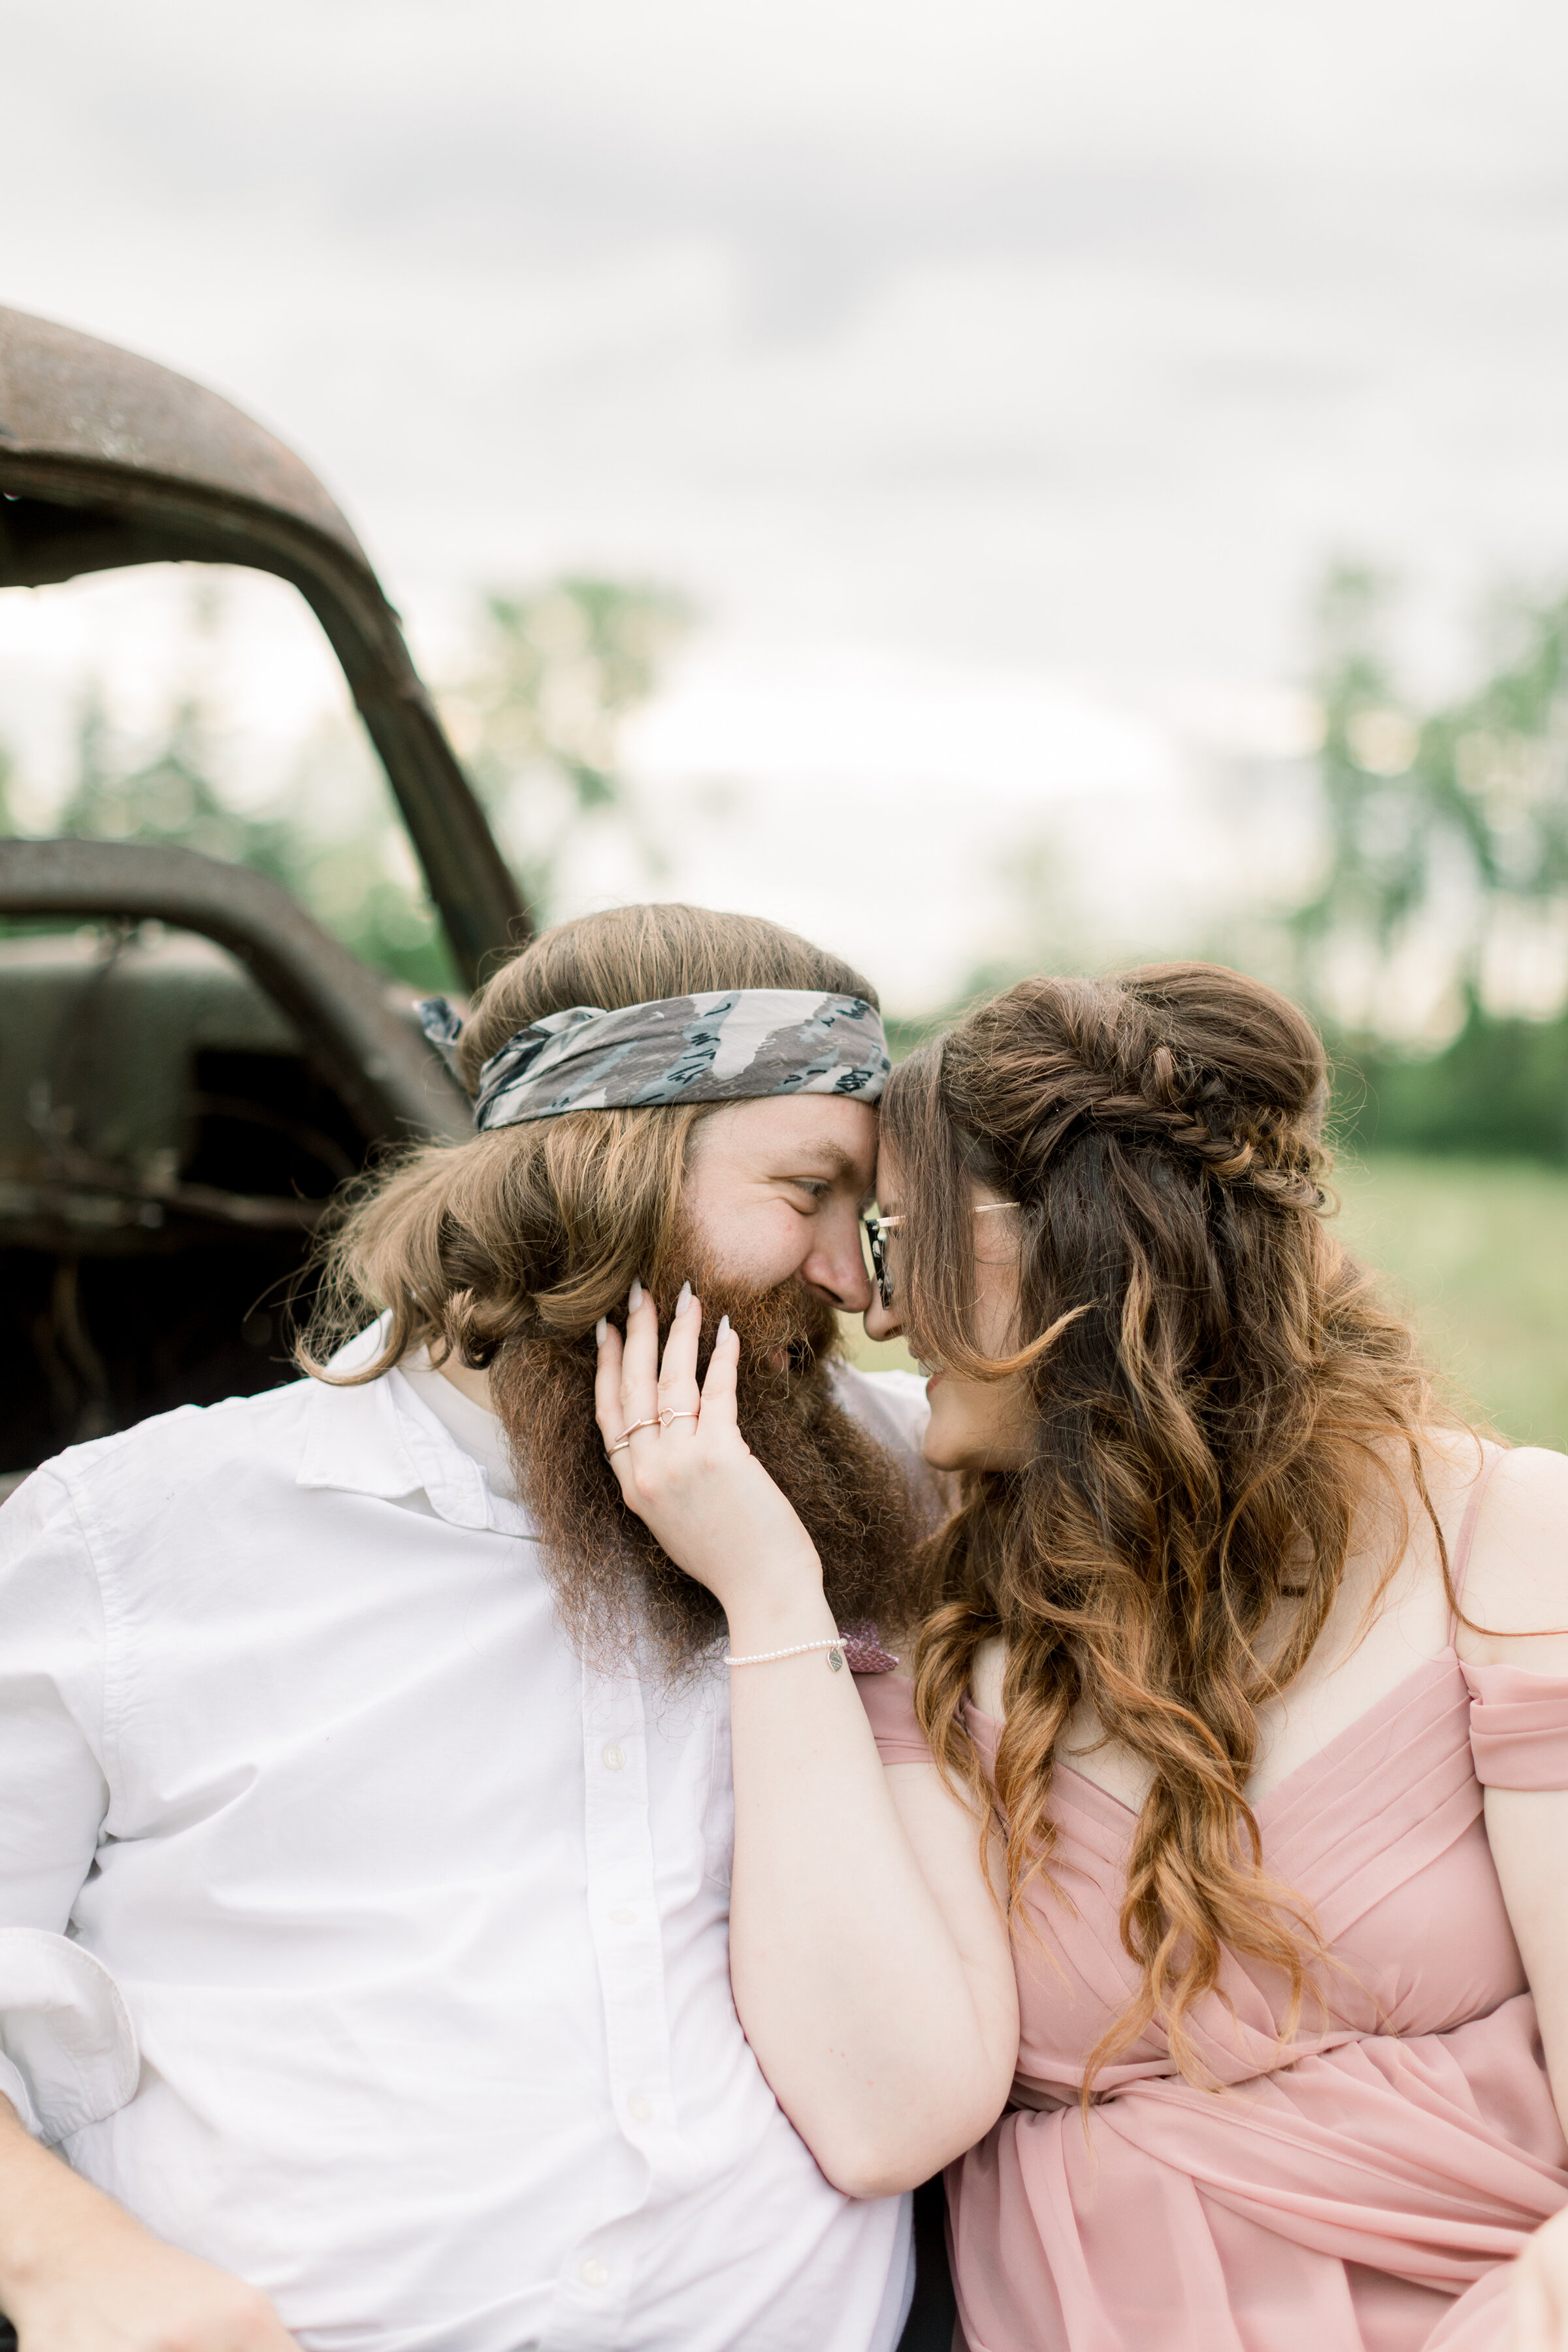  The bride to be holds her fiancés face as she goes in for a kiss in a beautiful romantic rustic styled engagement session by Chelsea Mason Photography in Smith Falls, Ontario Canada. Couple pose inspiration ideas and goals  women’s engagement attire